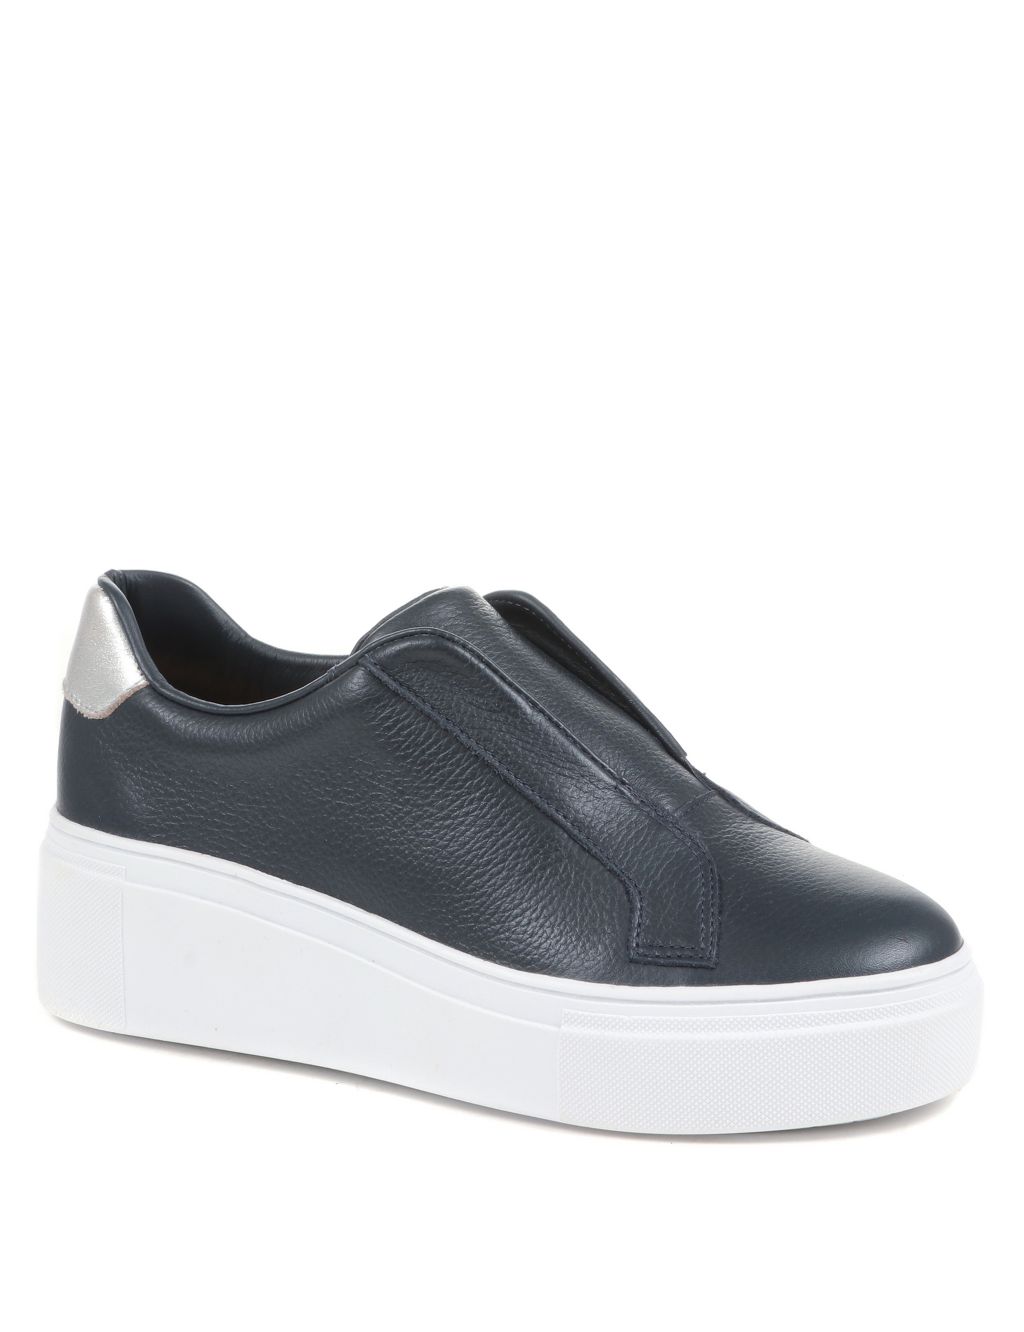 Leather Slip On Trainers image 2